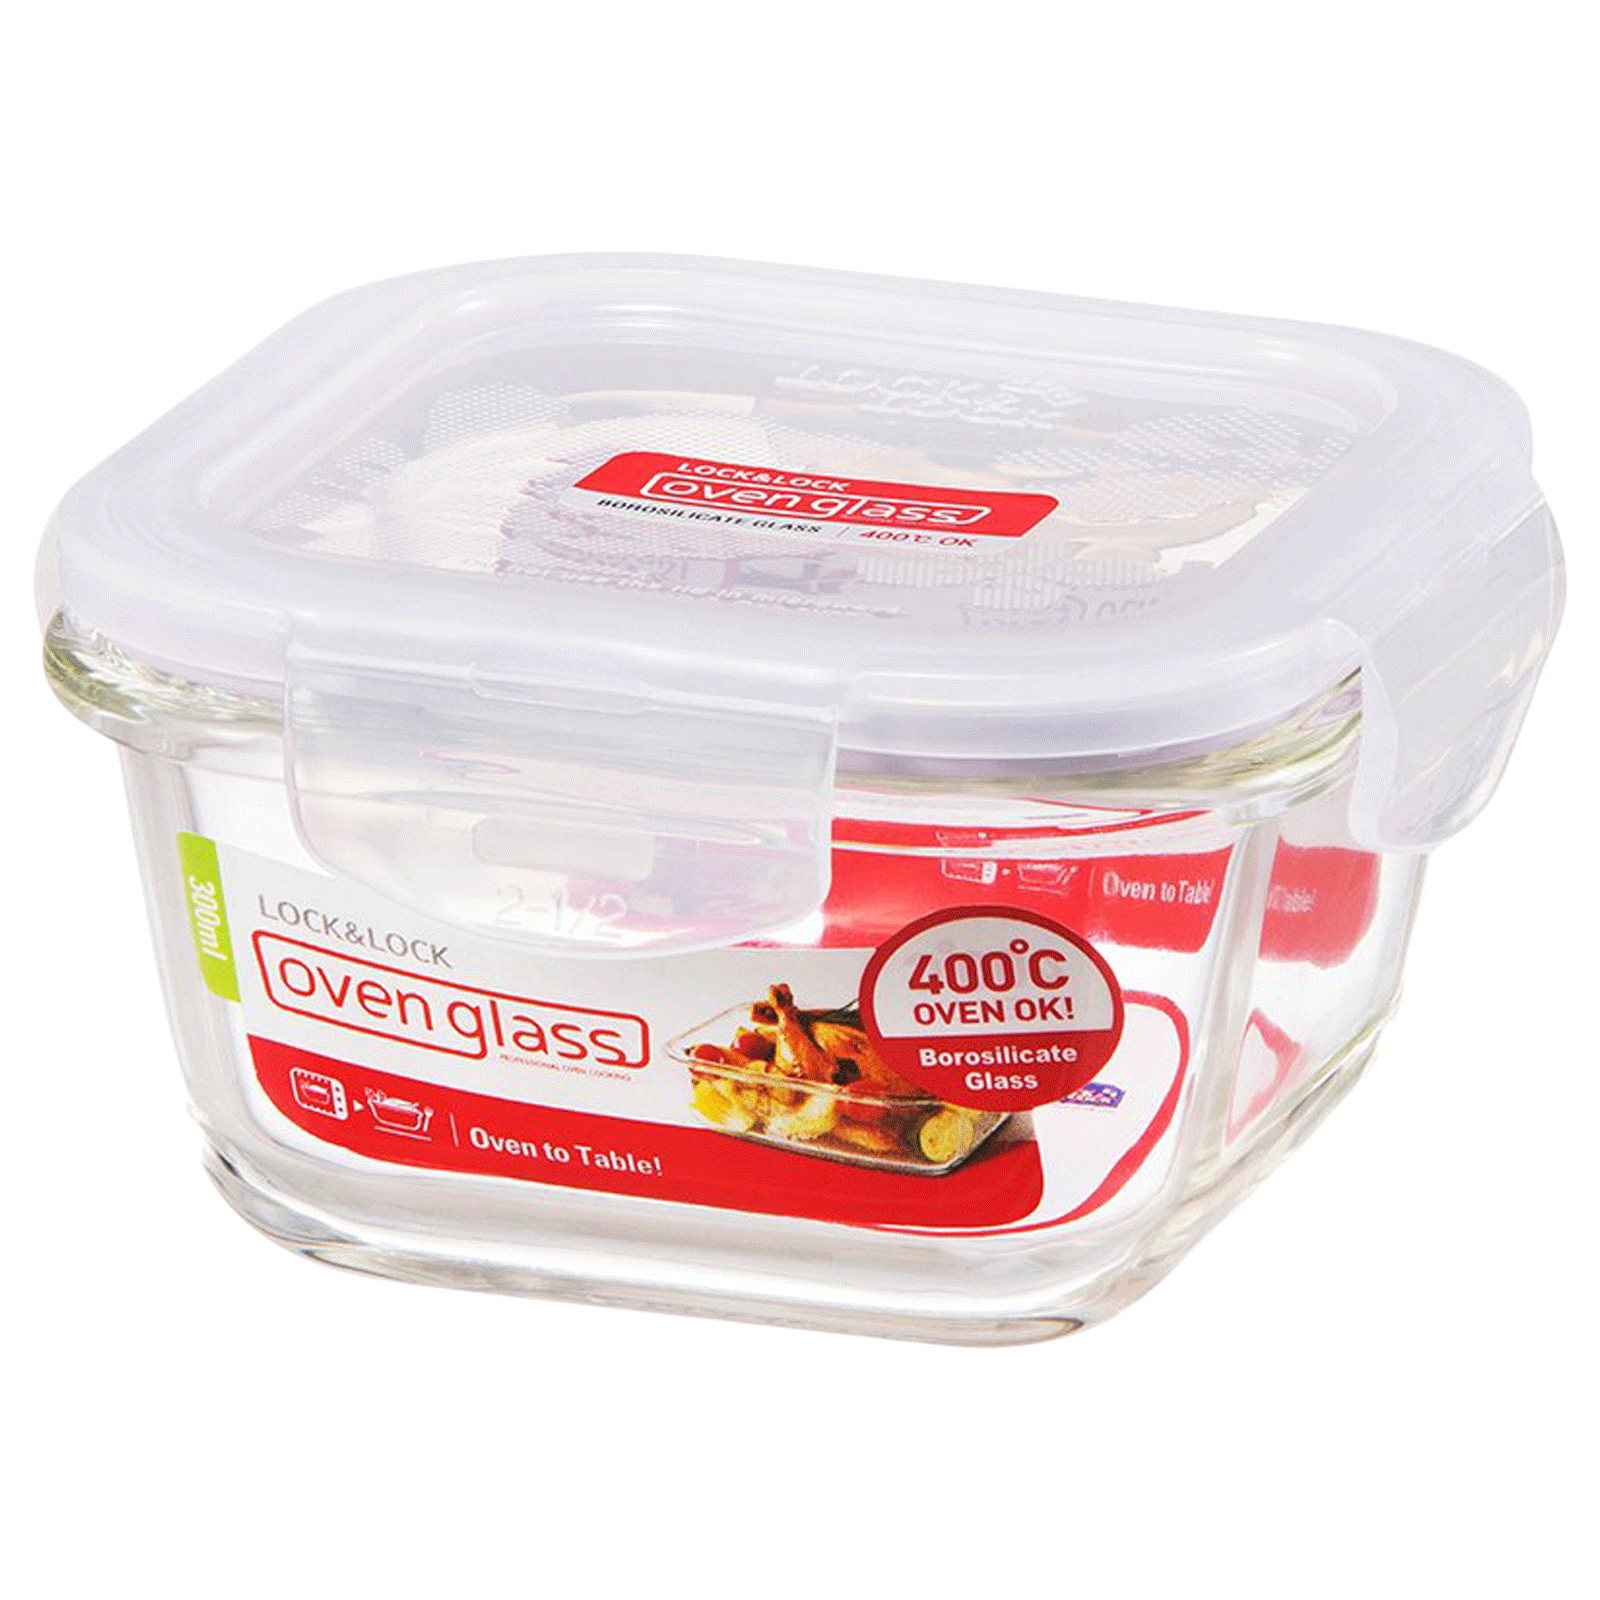 Lock & Lock Ovenglass 300 ml Square Glass Storage Container (Oven Safe, LLG205, Transparent)_1